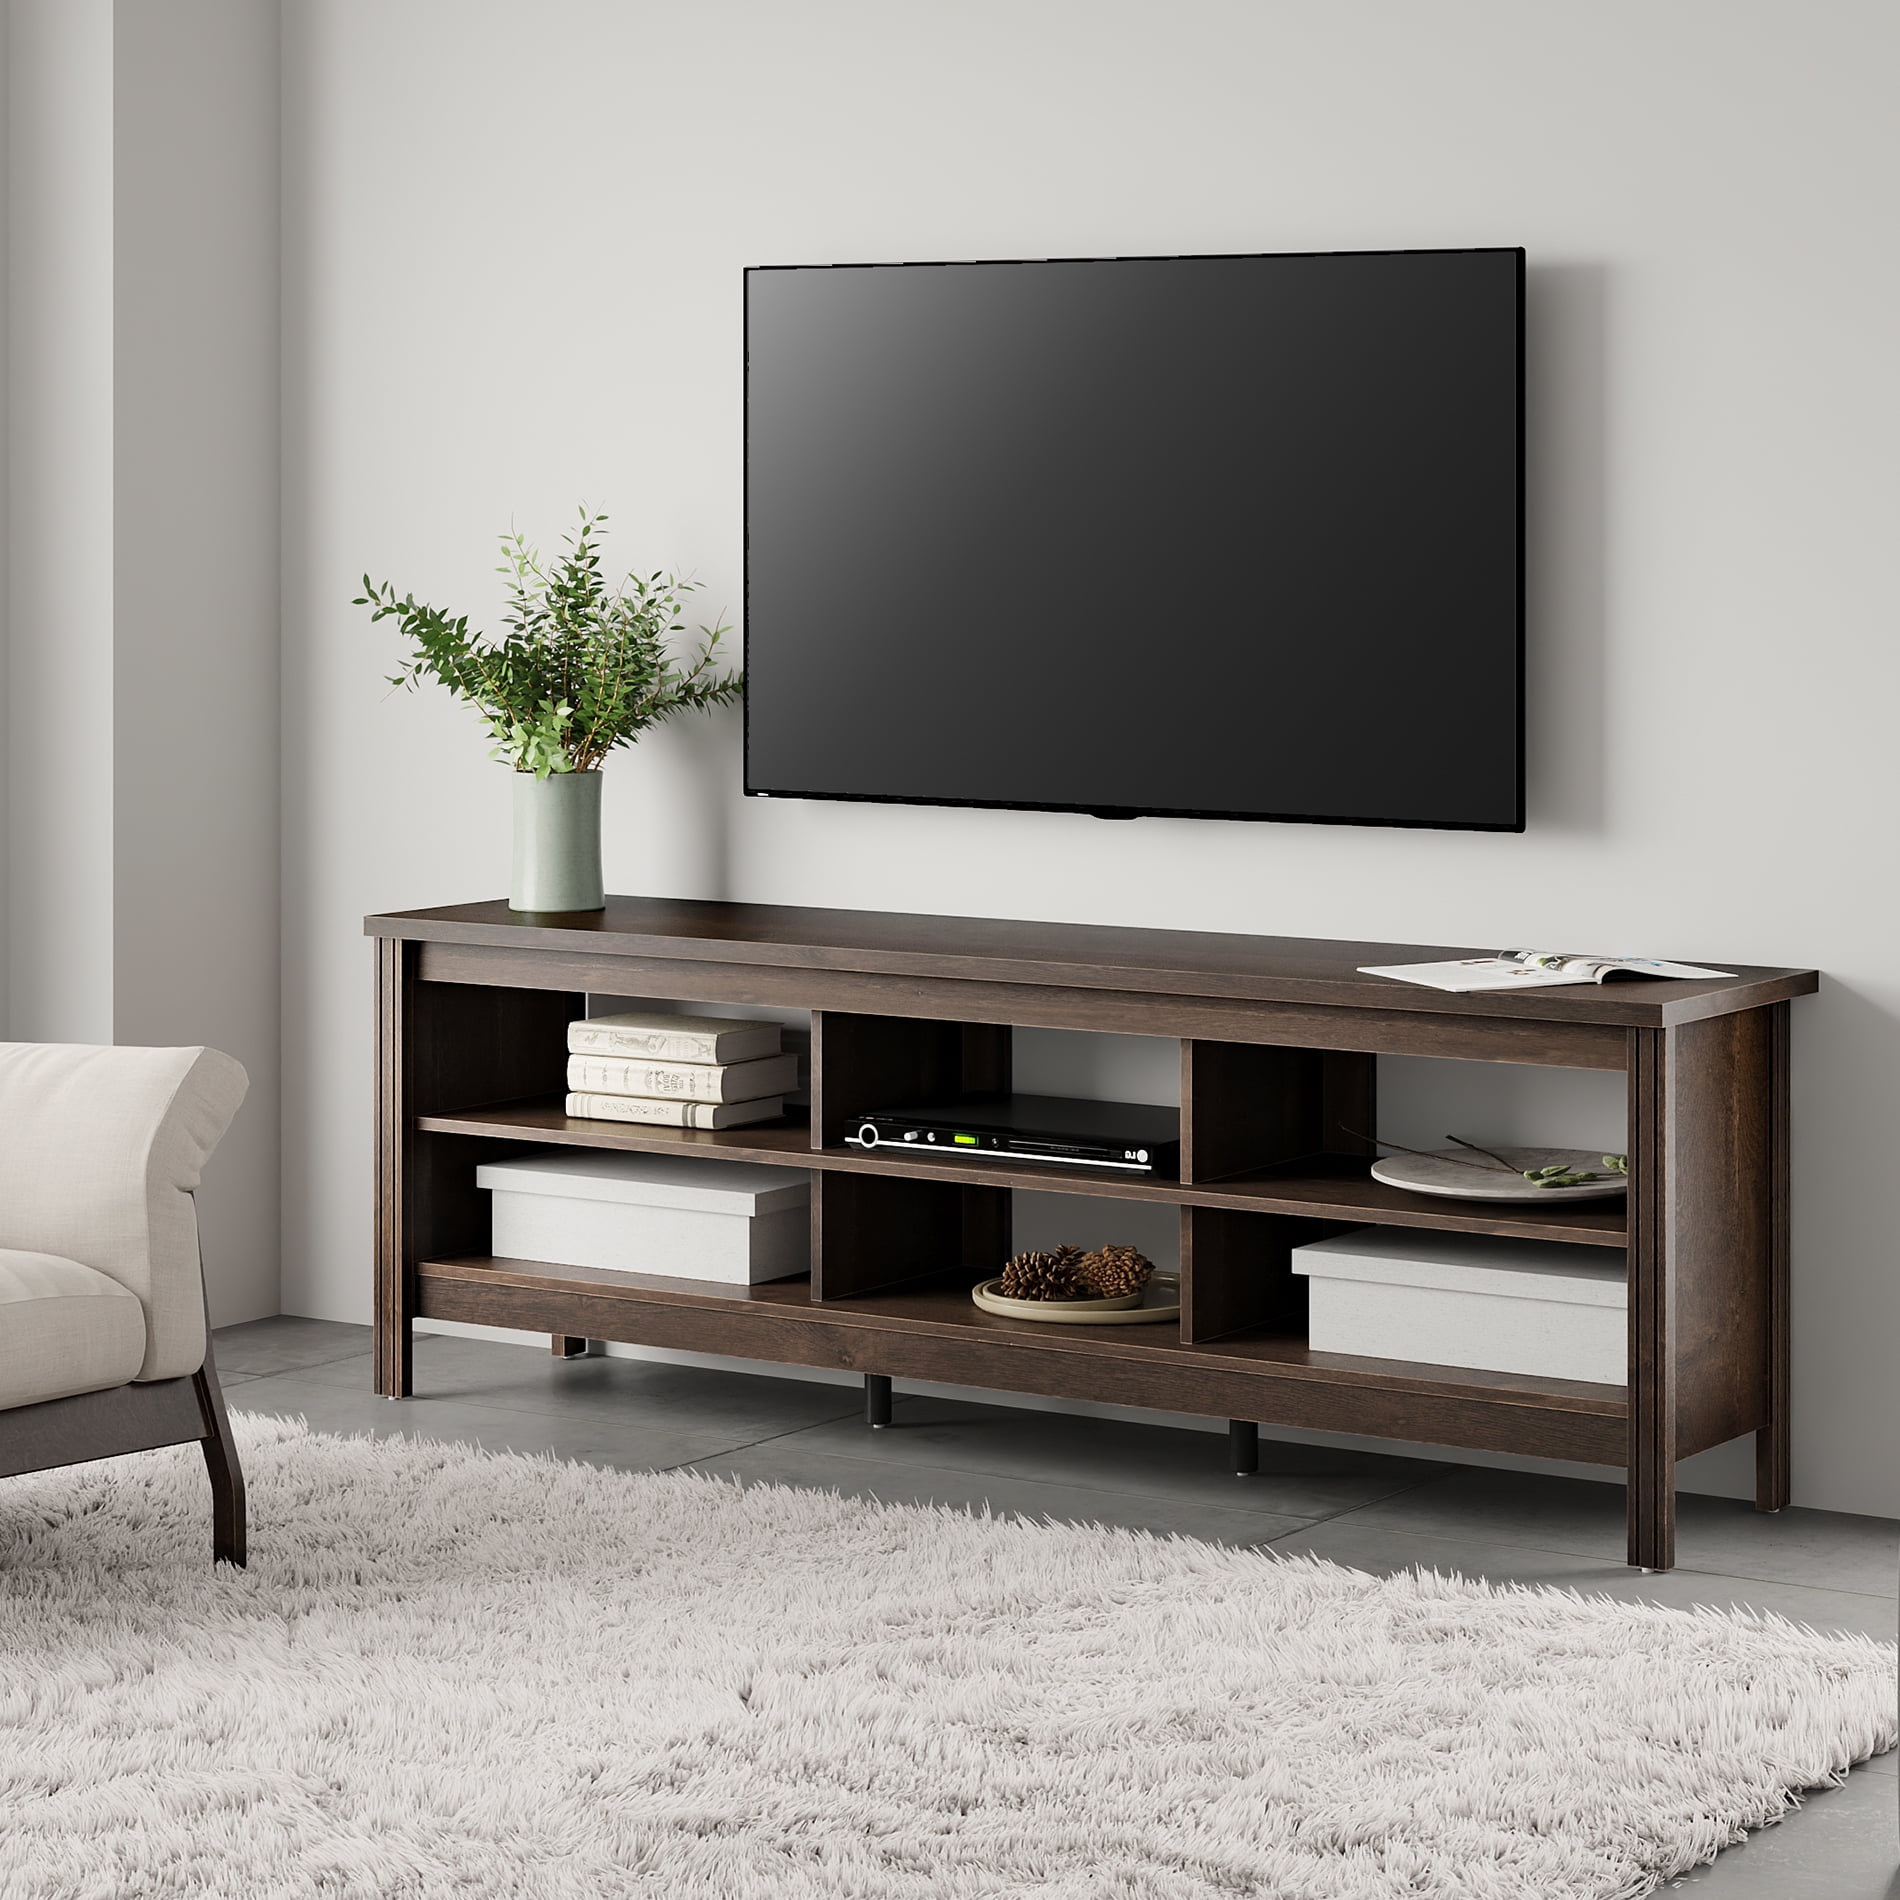 Details about   Low Console 75" TV Stand Media Center Credenza Drawer Shelves Wood Espresso 